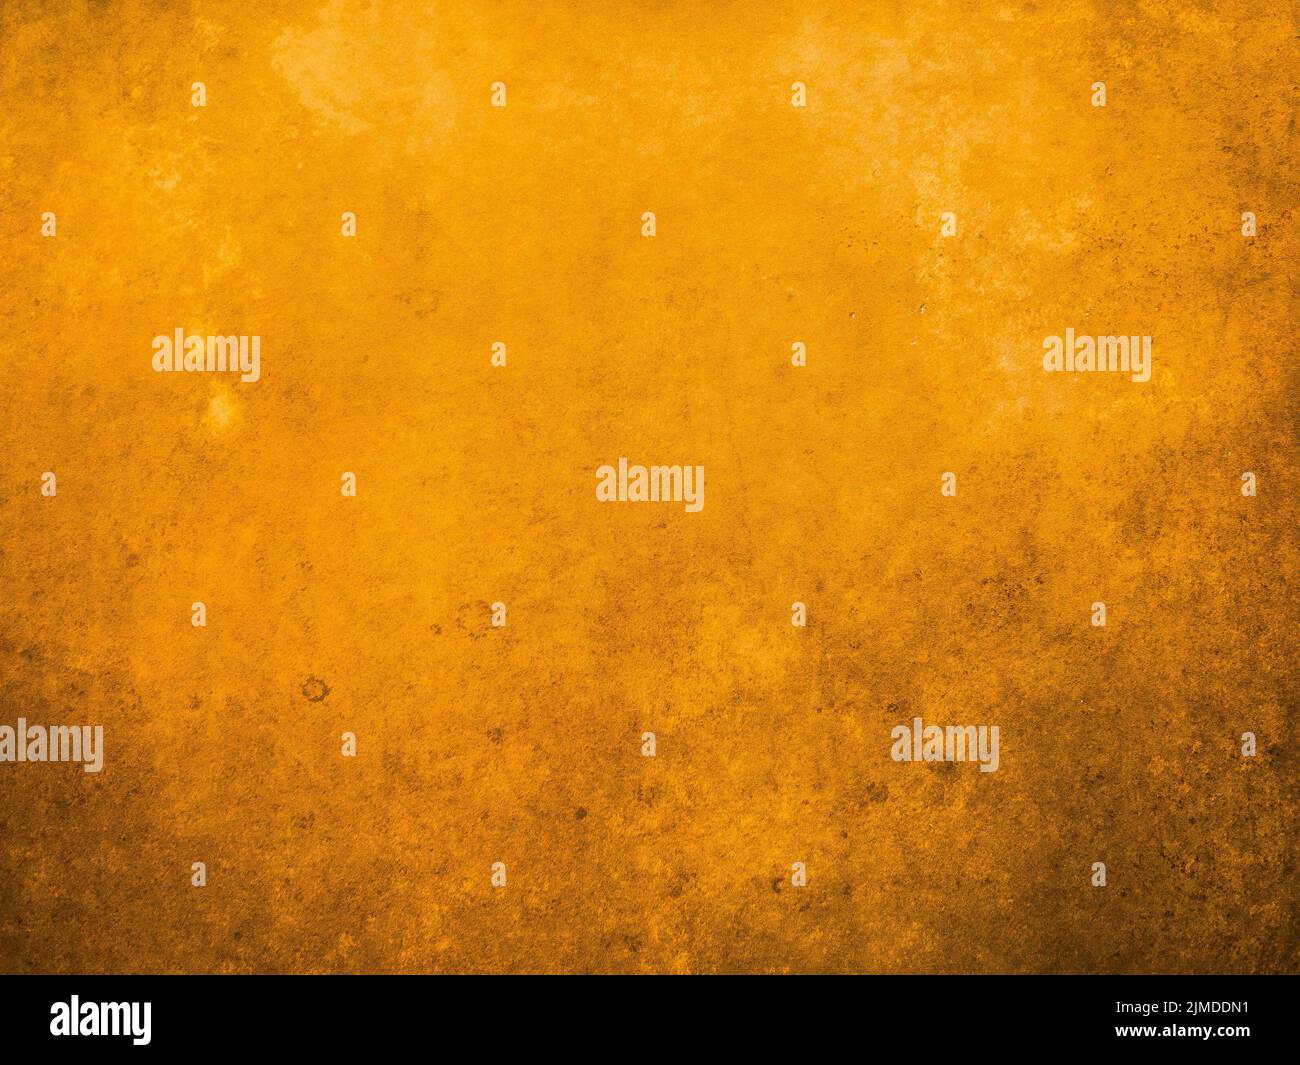 Orange Abstract Background. Grunge Surface Decorative Design Textures And Backgrounds Stock Photo